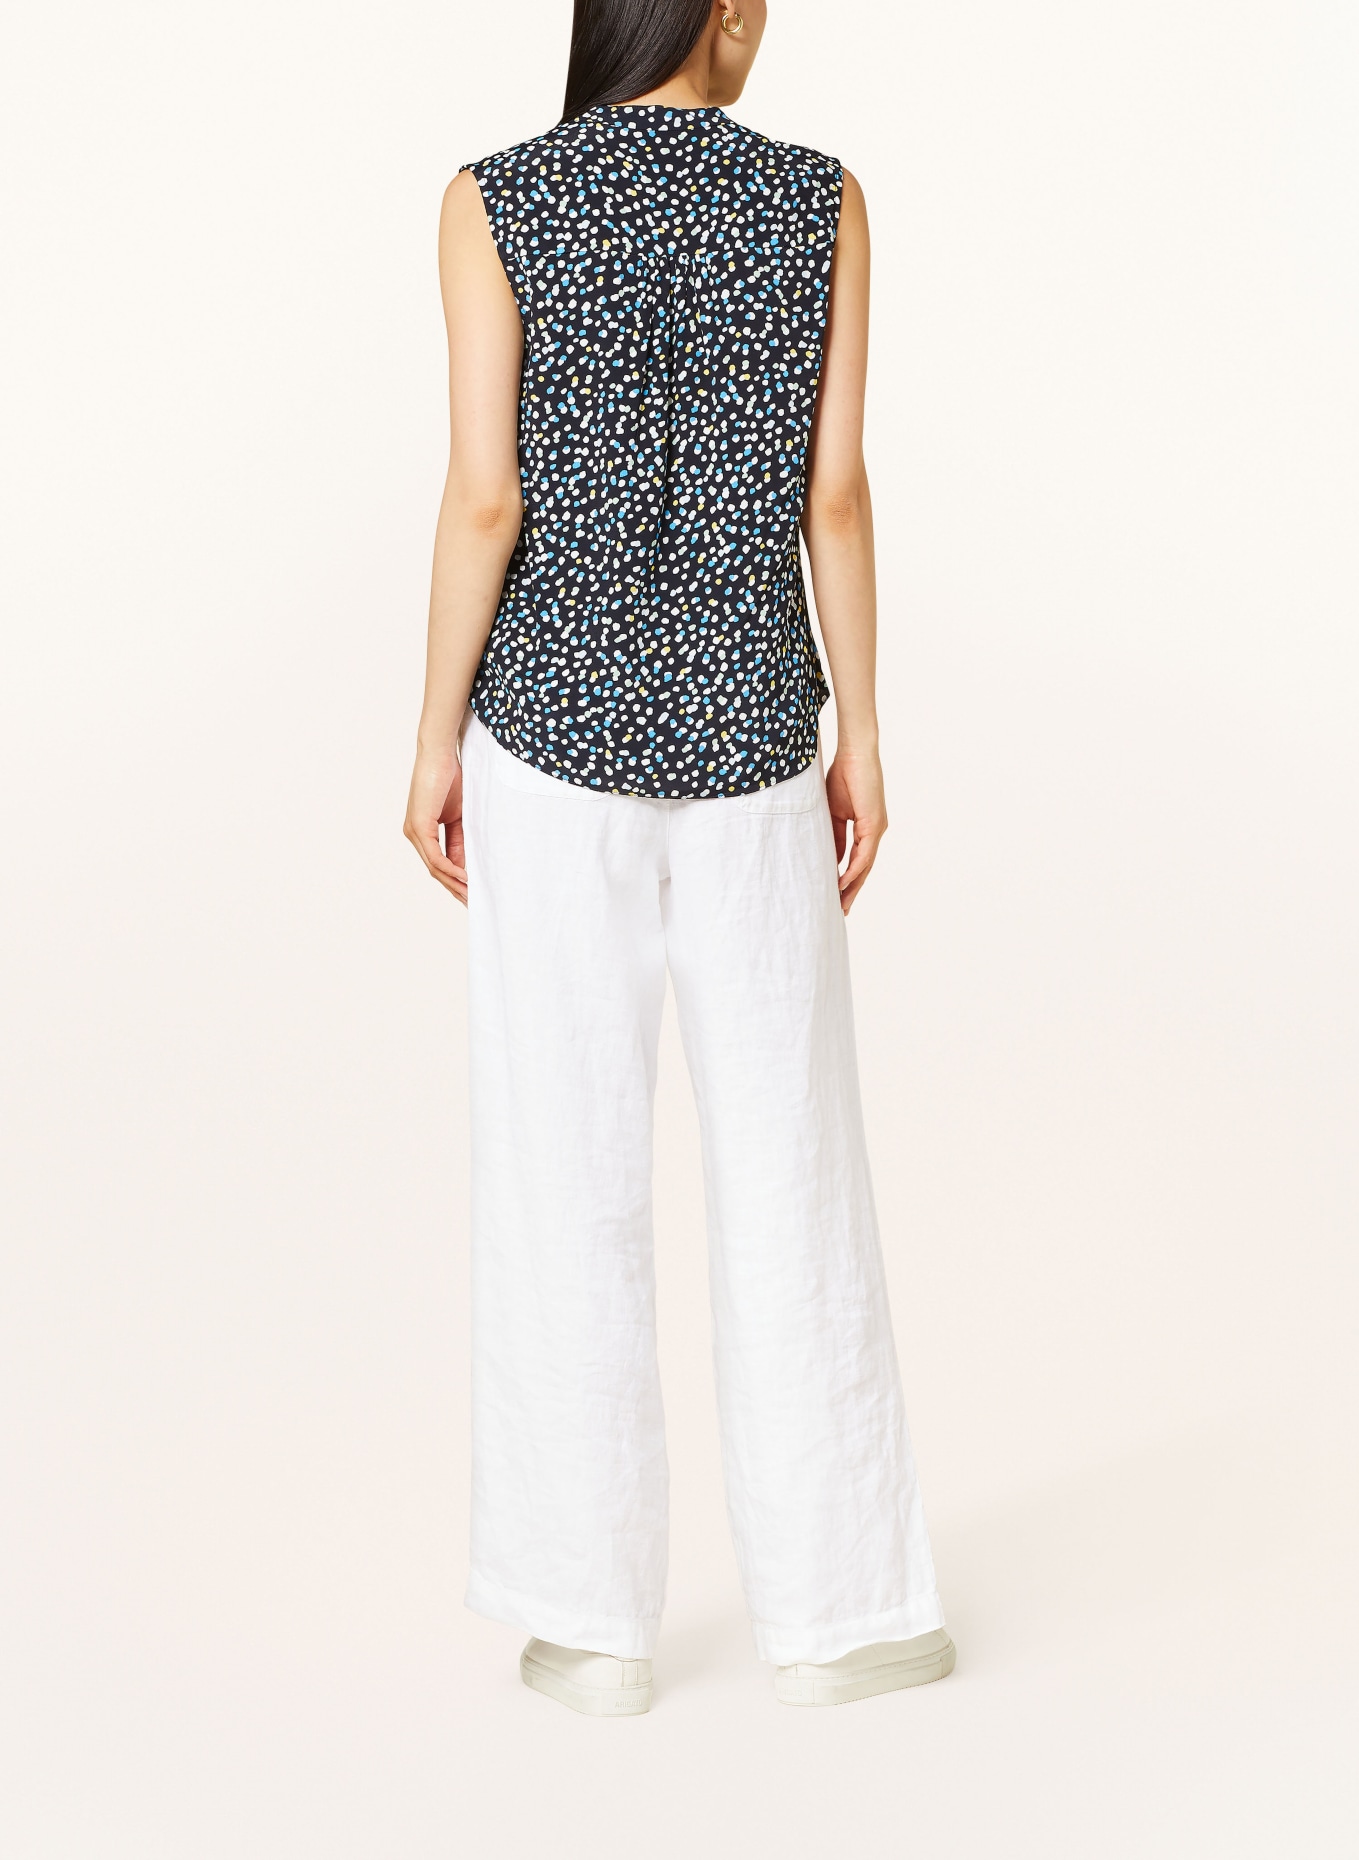 HOBBS Blouse top, Color: DARK BLUE/ WHITE/ TURQUOISE (Image 3)